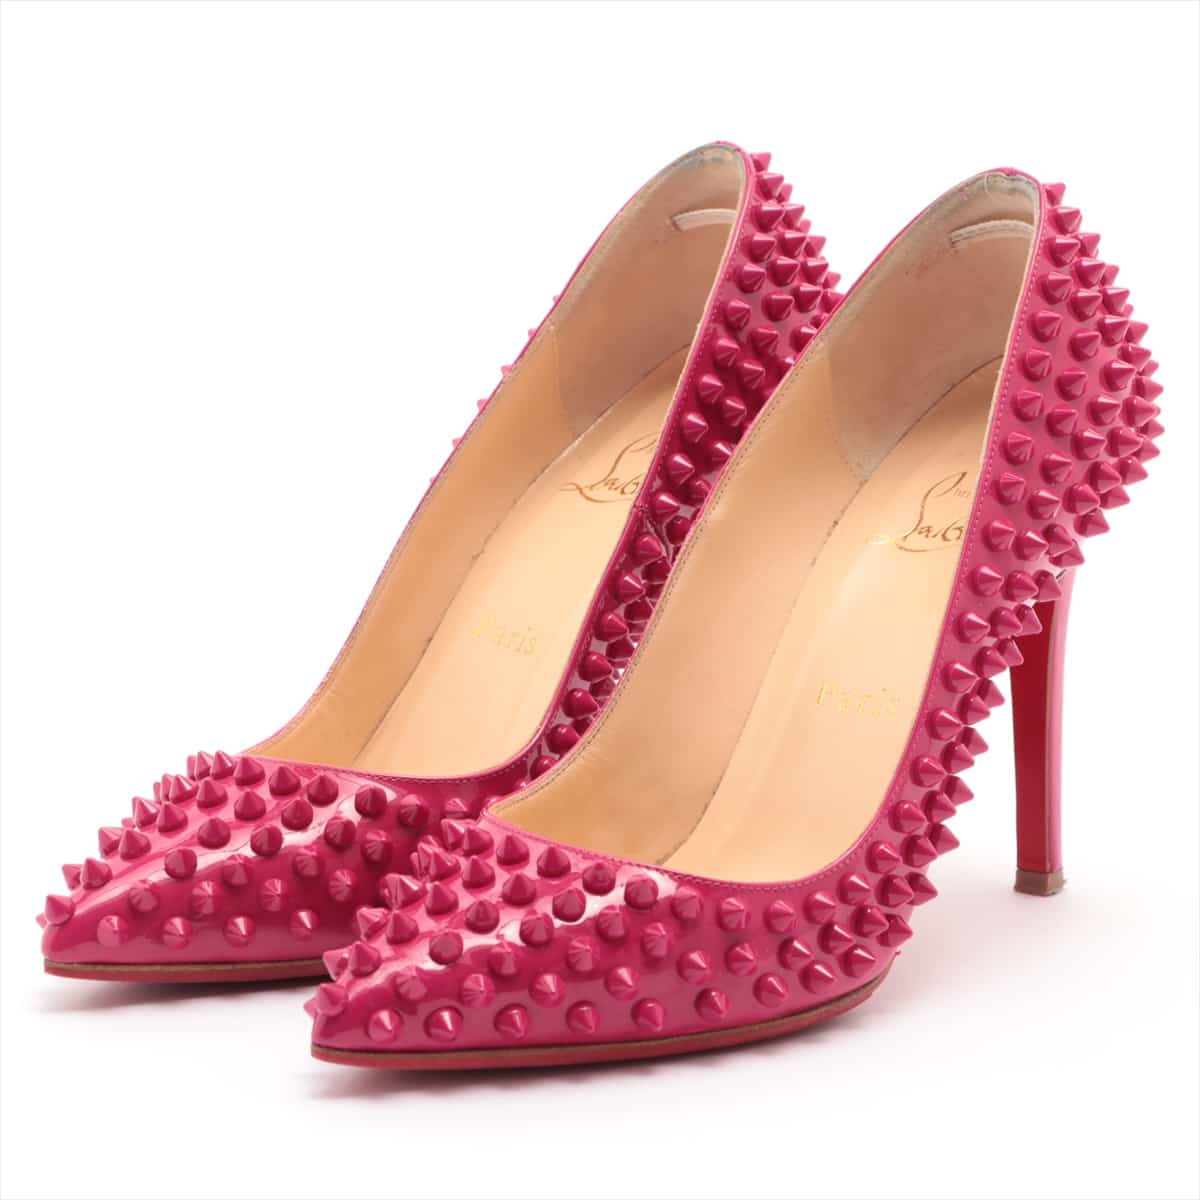 Christian Louboutin Patent leather Pumps 37 Ladies' Pink Spike Studs Resoled